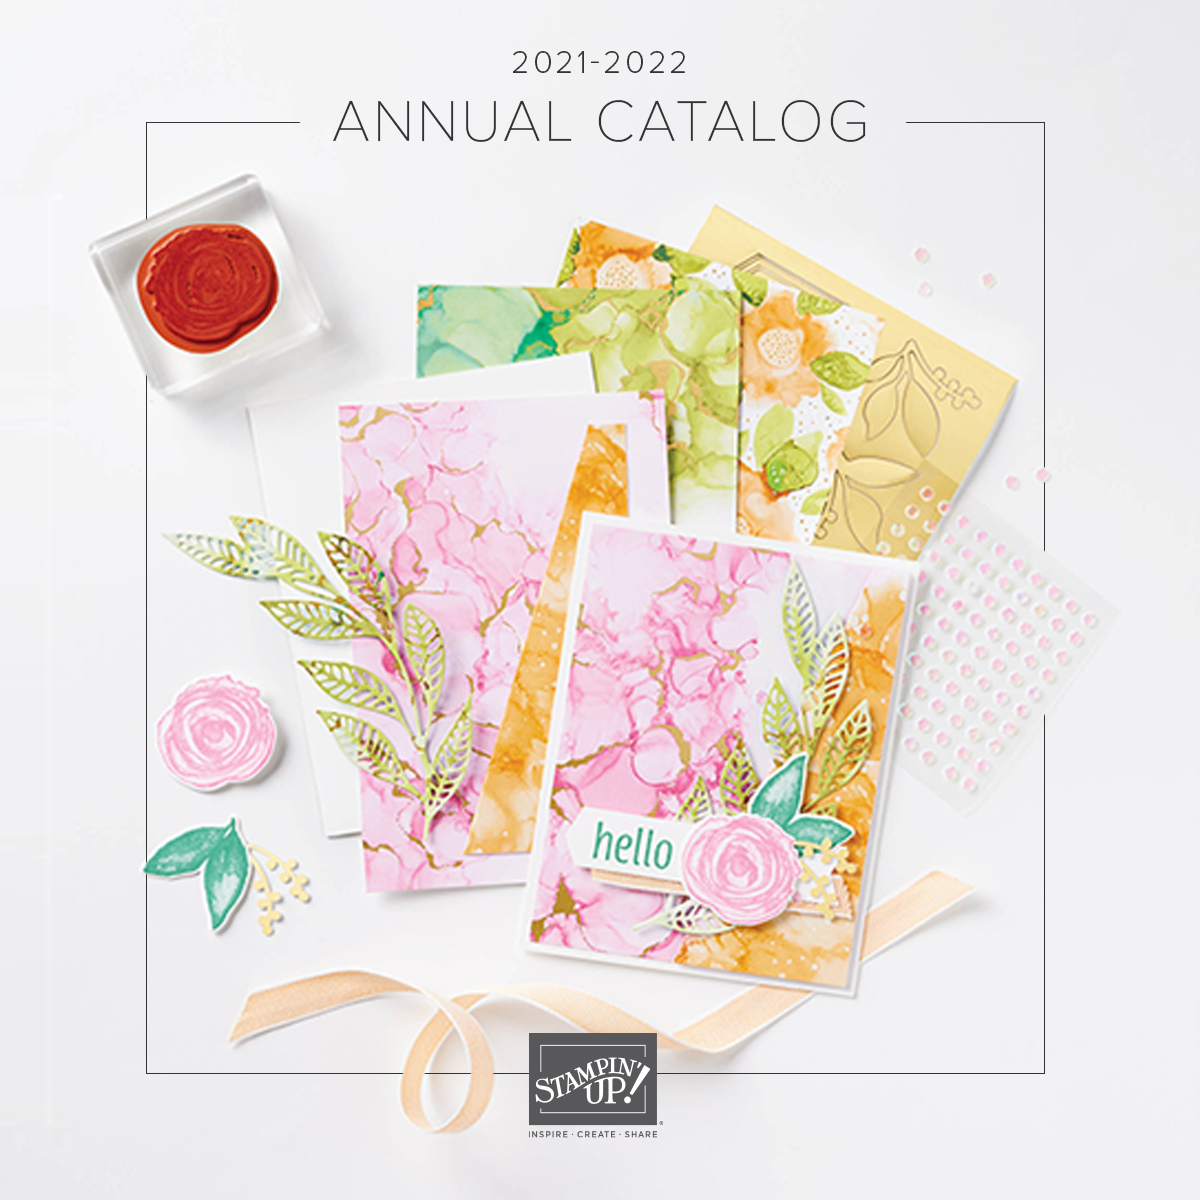 2021-2022 Stampin' Up! Annual Catalog | Join Stampin’ Up! | Frequently Asked Questions about becoming a Stampin’ Up! Demonstrator | Join the Craft Stampin’ Crew | Stampin Up Demonstrator Linda Cullen | Crafty Stampin’ | Purchase your Stampin’ Up Supplies |